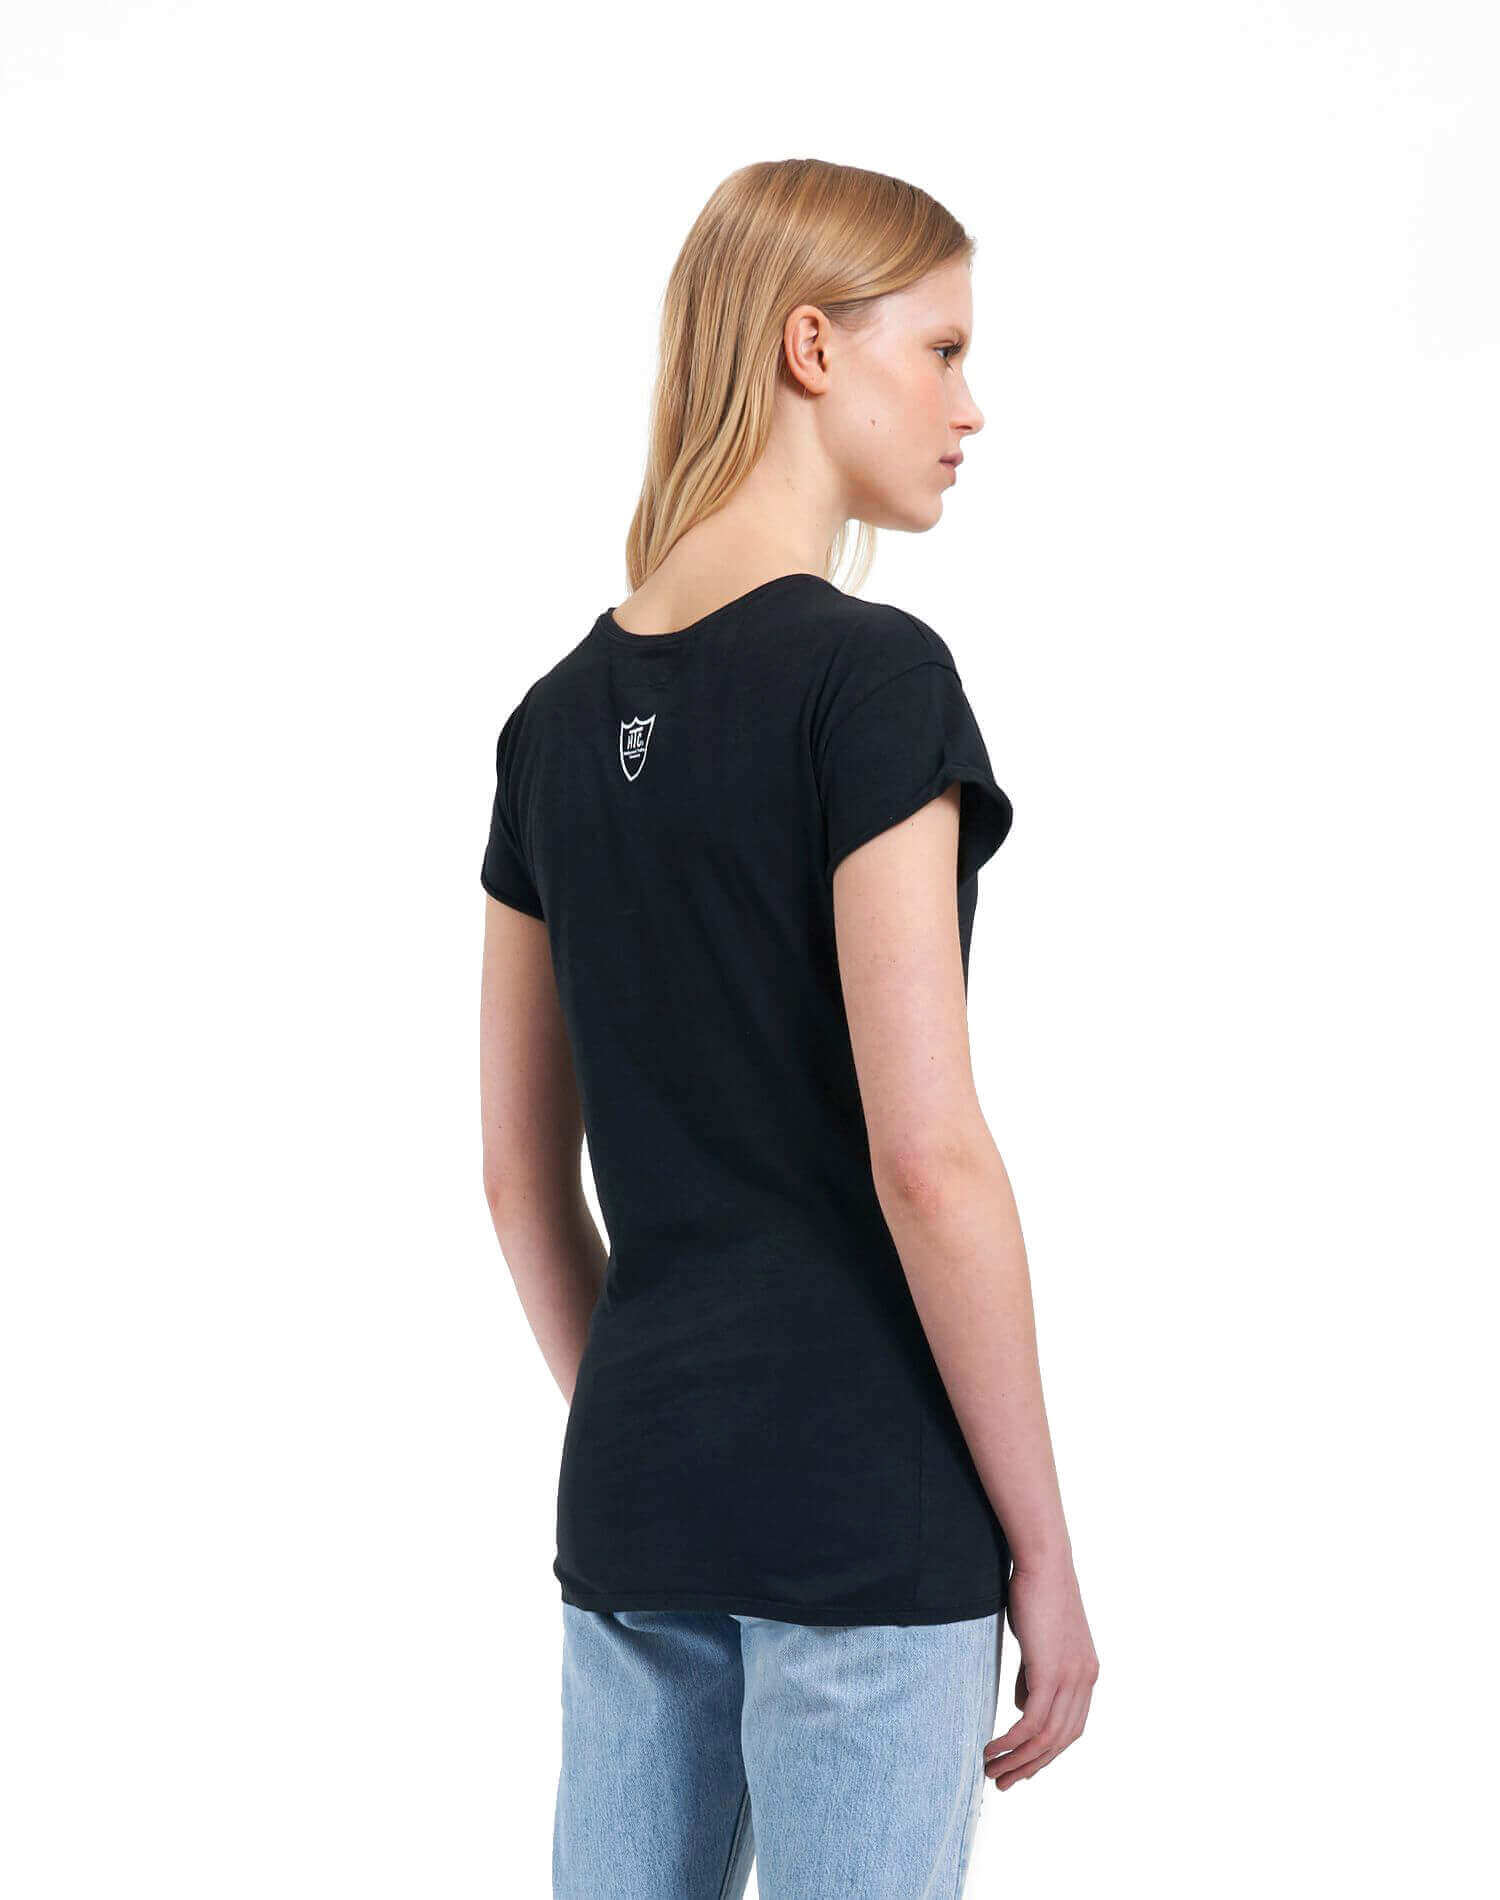 HTC BASIC T-SHIRT WOMAN Black cotton t-shirt with white HTC Los Angeles shield logo printed on the front. HTC LOS ANGELES